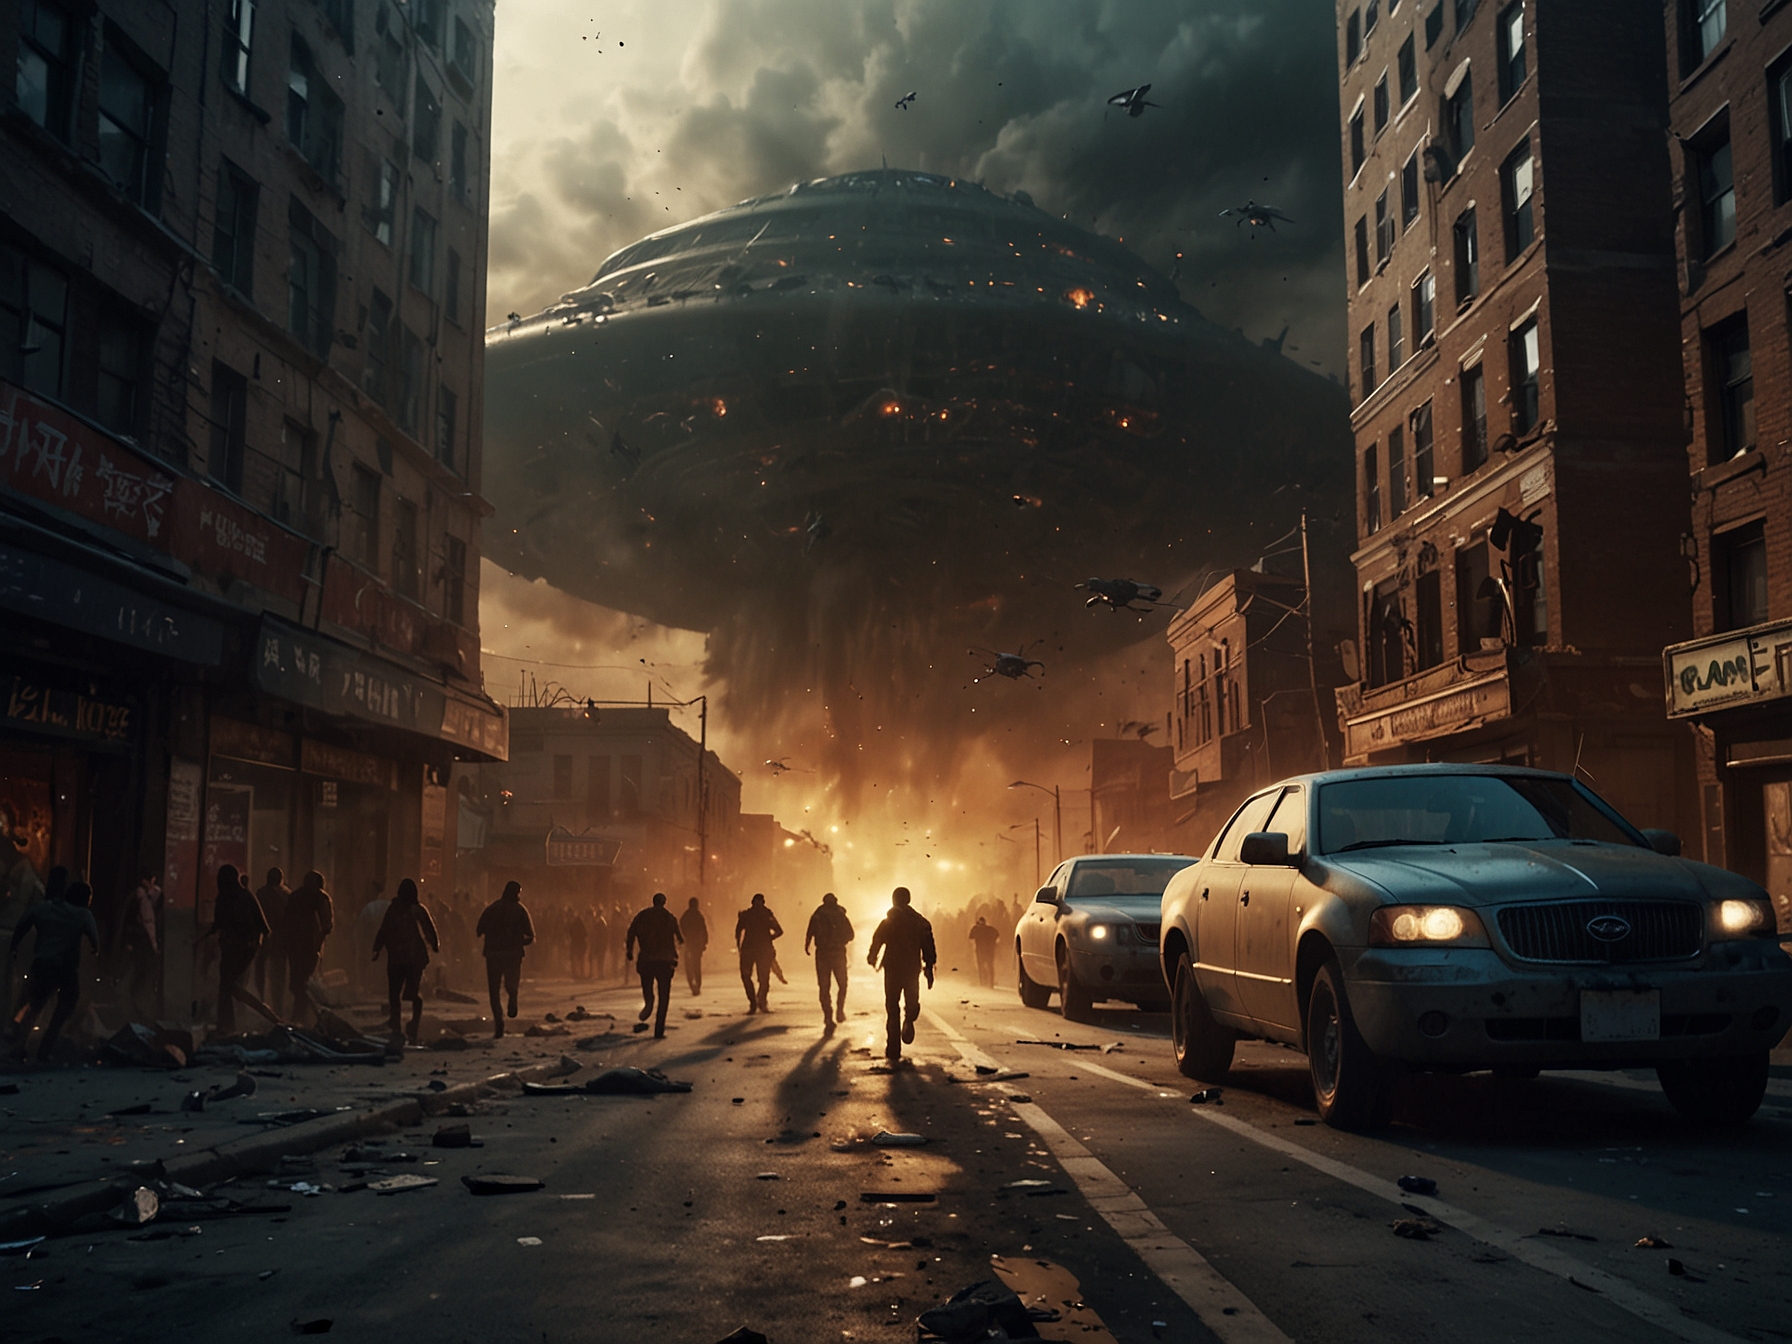 A scene depicting the sheer abruptness and brutality of the alien invasion, with people running in panic through a desolate city street, showcasing the chaos and despair of the initial attack.